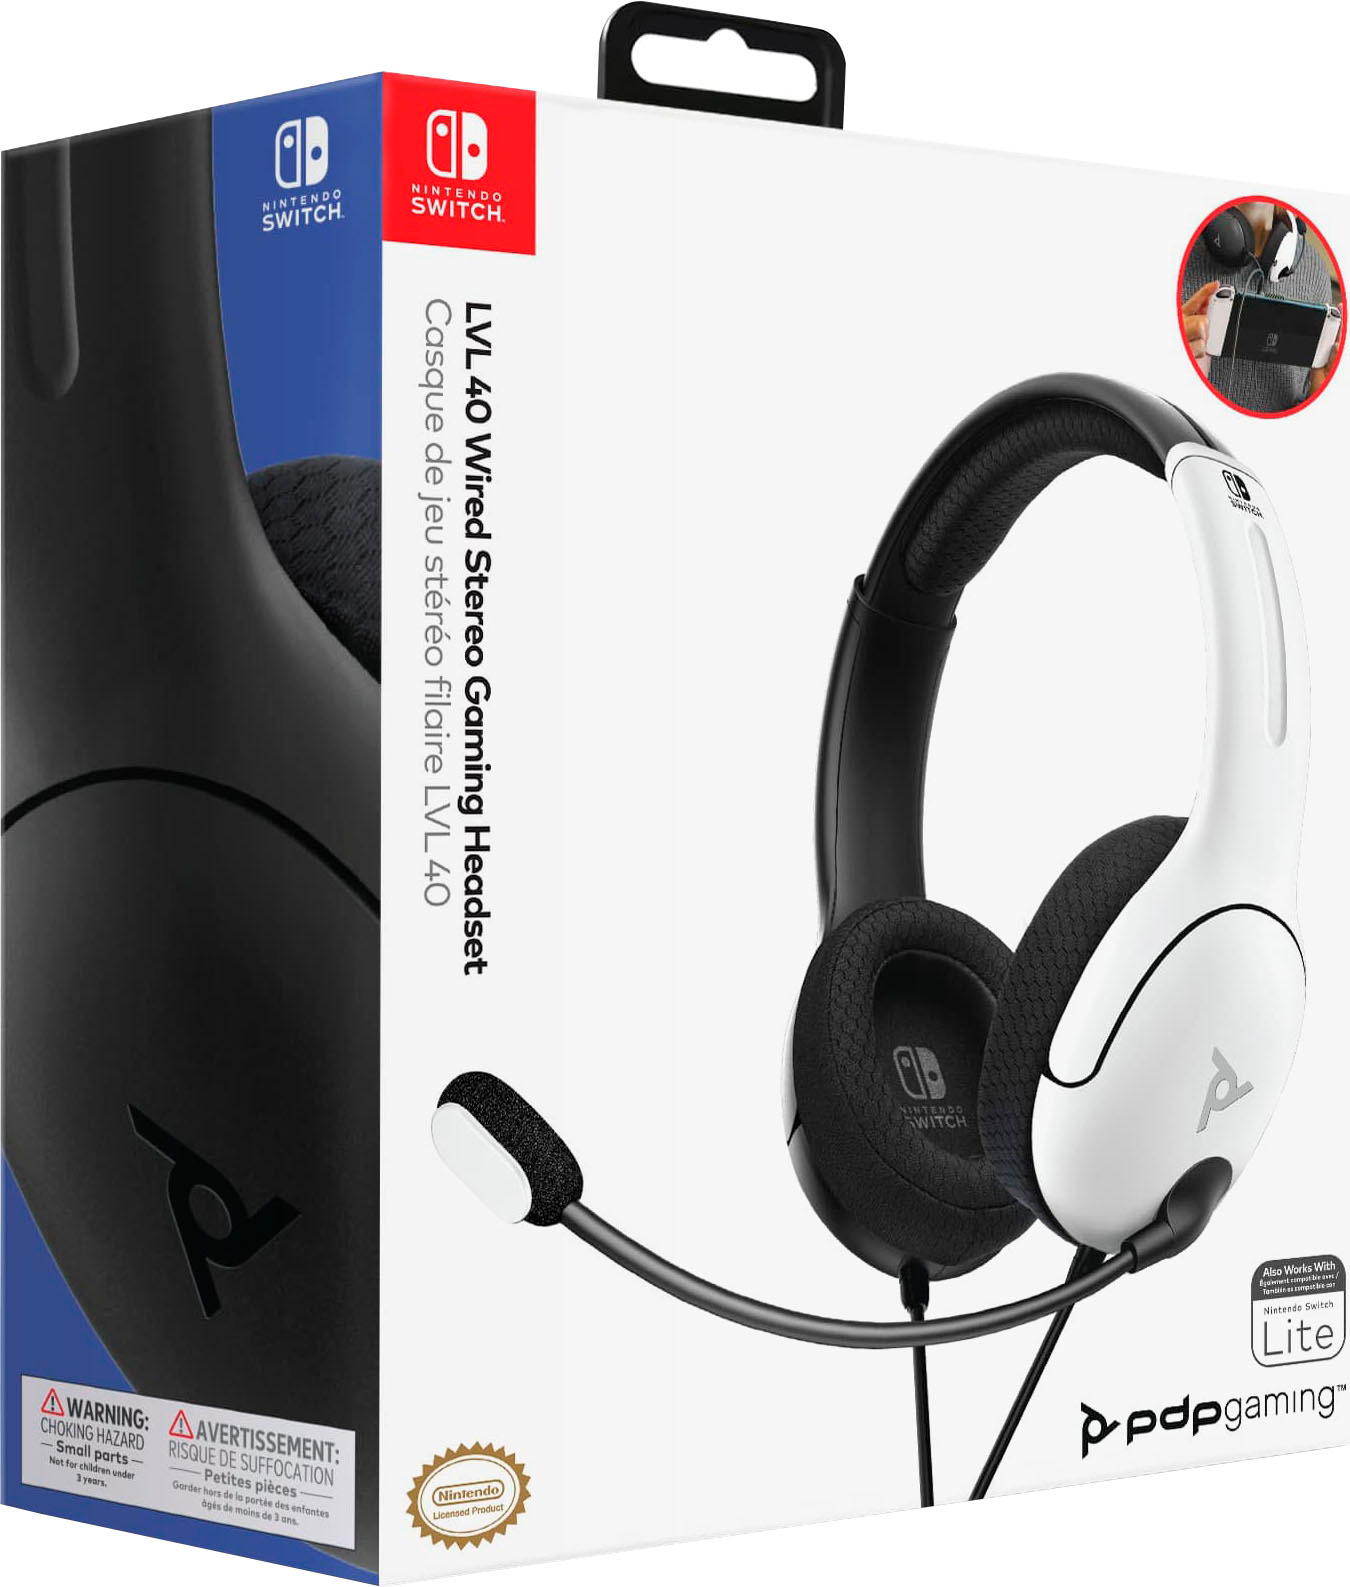 PDP LVL30 Wired Mono Gaming Headset for Xbox One  - Best Buy